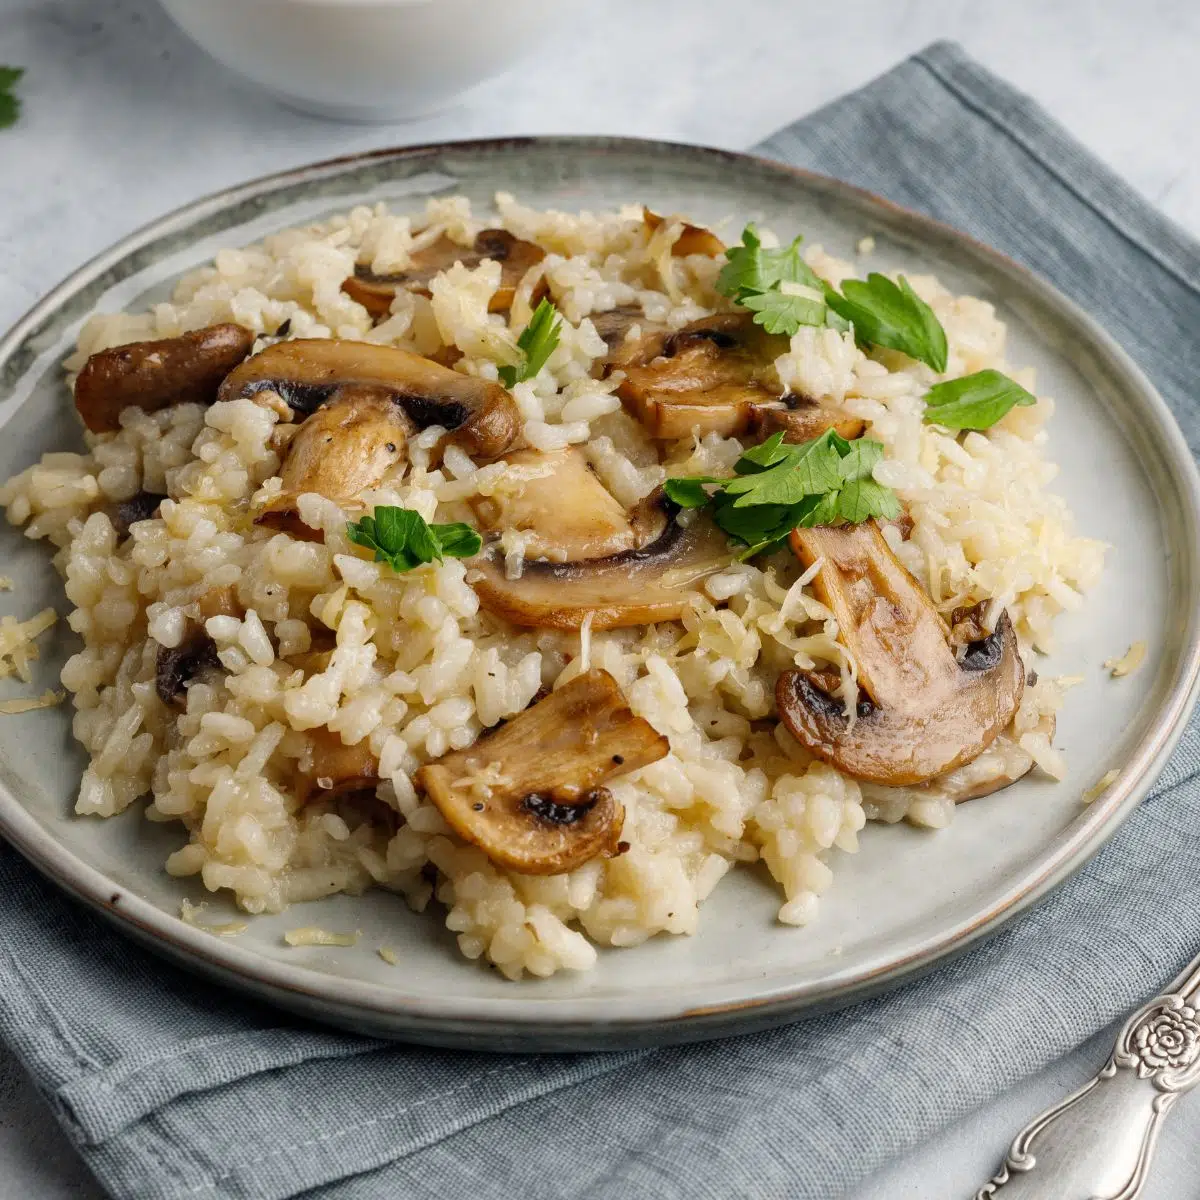 Square image showing a plate of mushroom risotto.